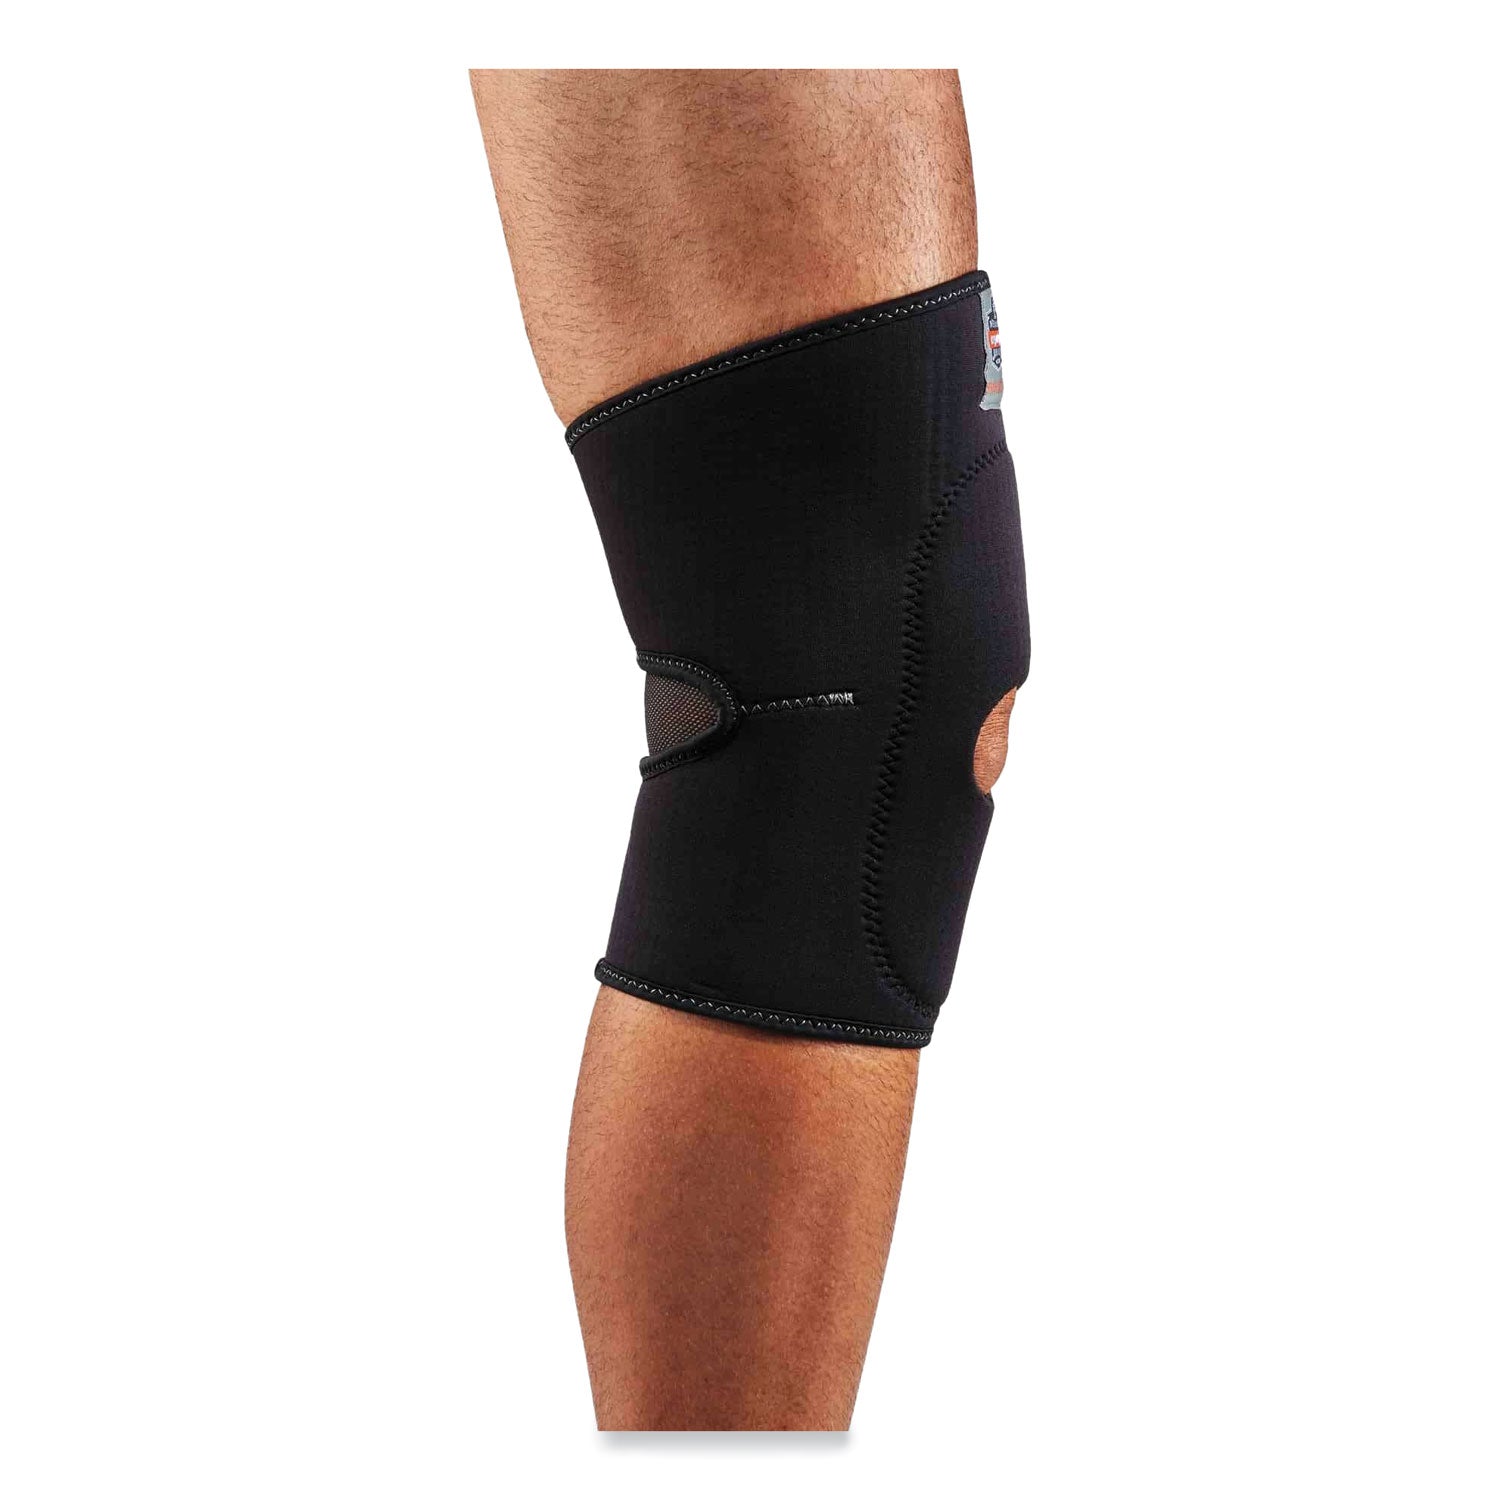 proflex-615-open-patella-anterior-pad-knee-sleeve-x-large-black-ships-in-1-3-business-days_ego16535 - 2